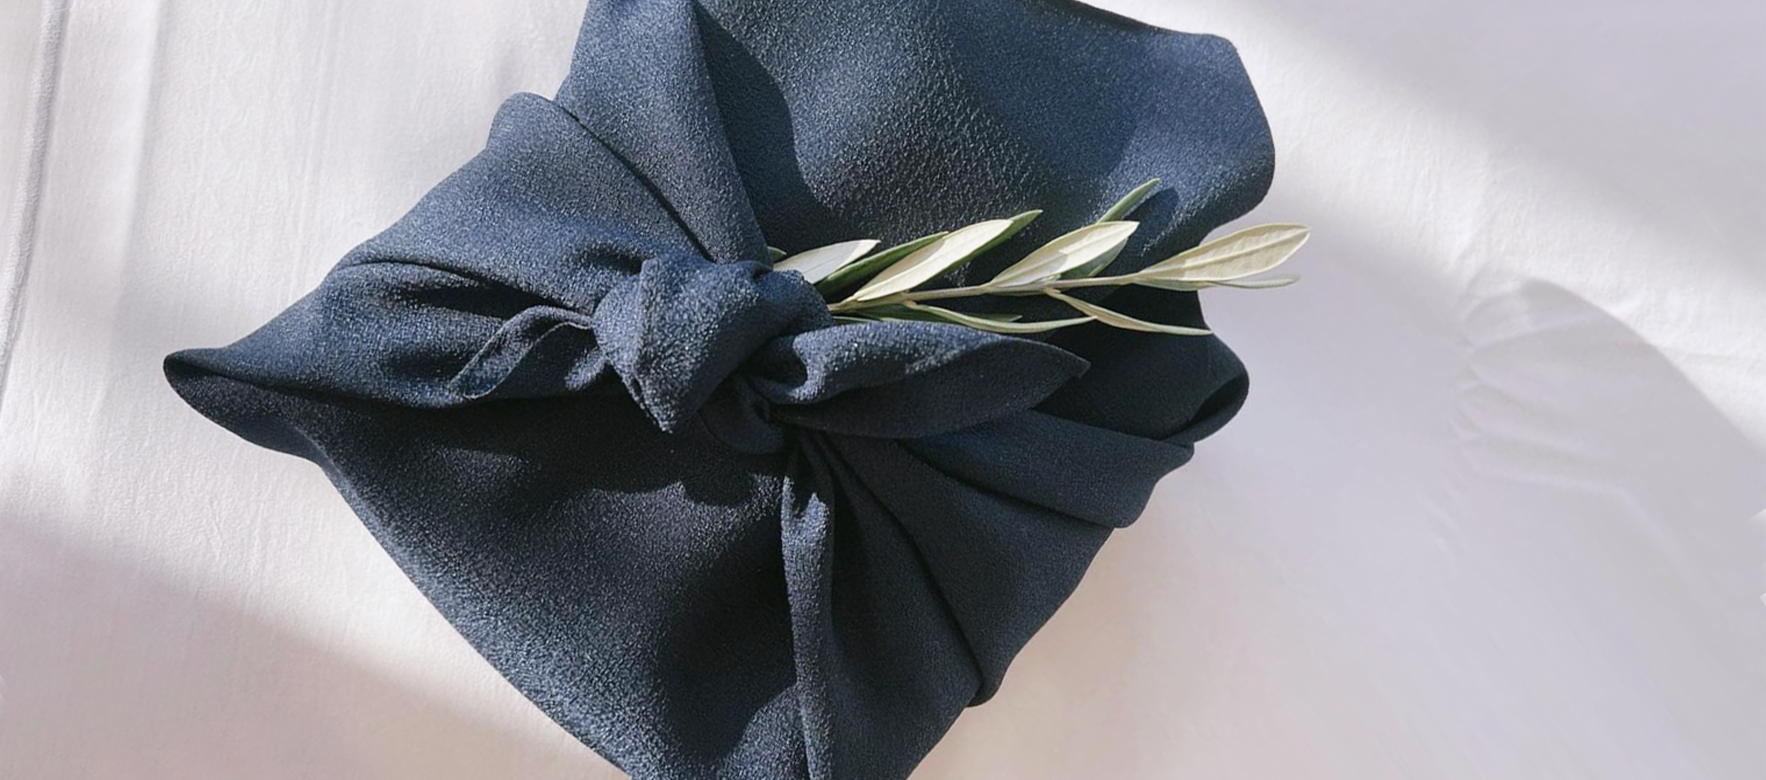 5 Ways to Wrap a Furoshiki, a Sustainable Japanese Wrapping Cloth